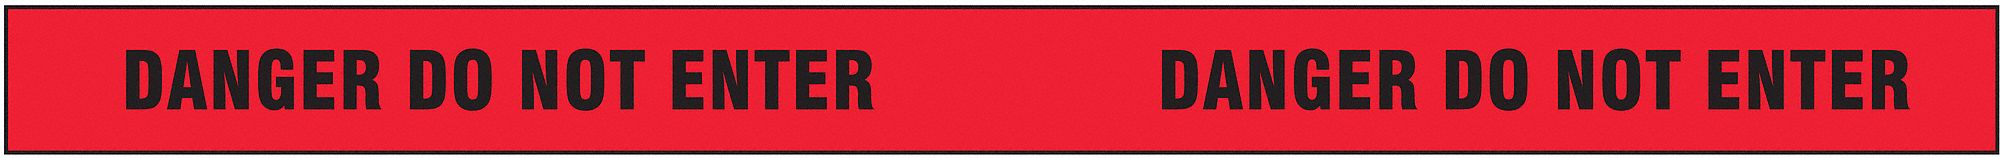 APPROVED VENDOR BARRICADE TAPE,RED/BLACK,180 FT X 2 IN - Barrier